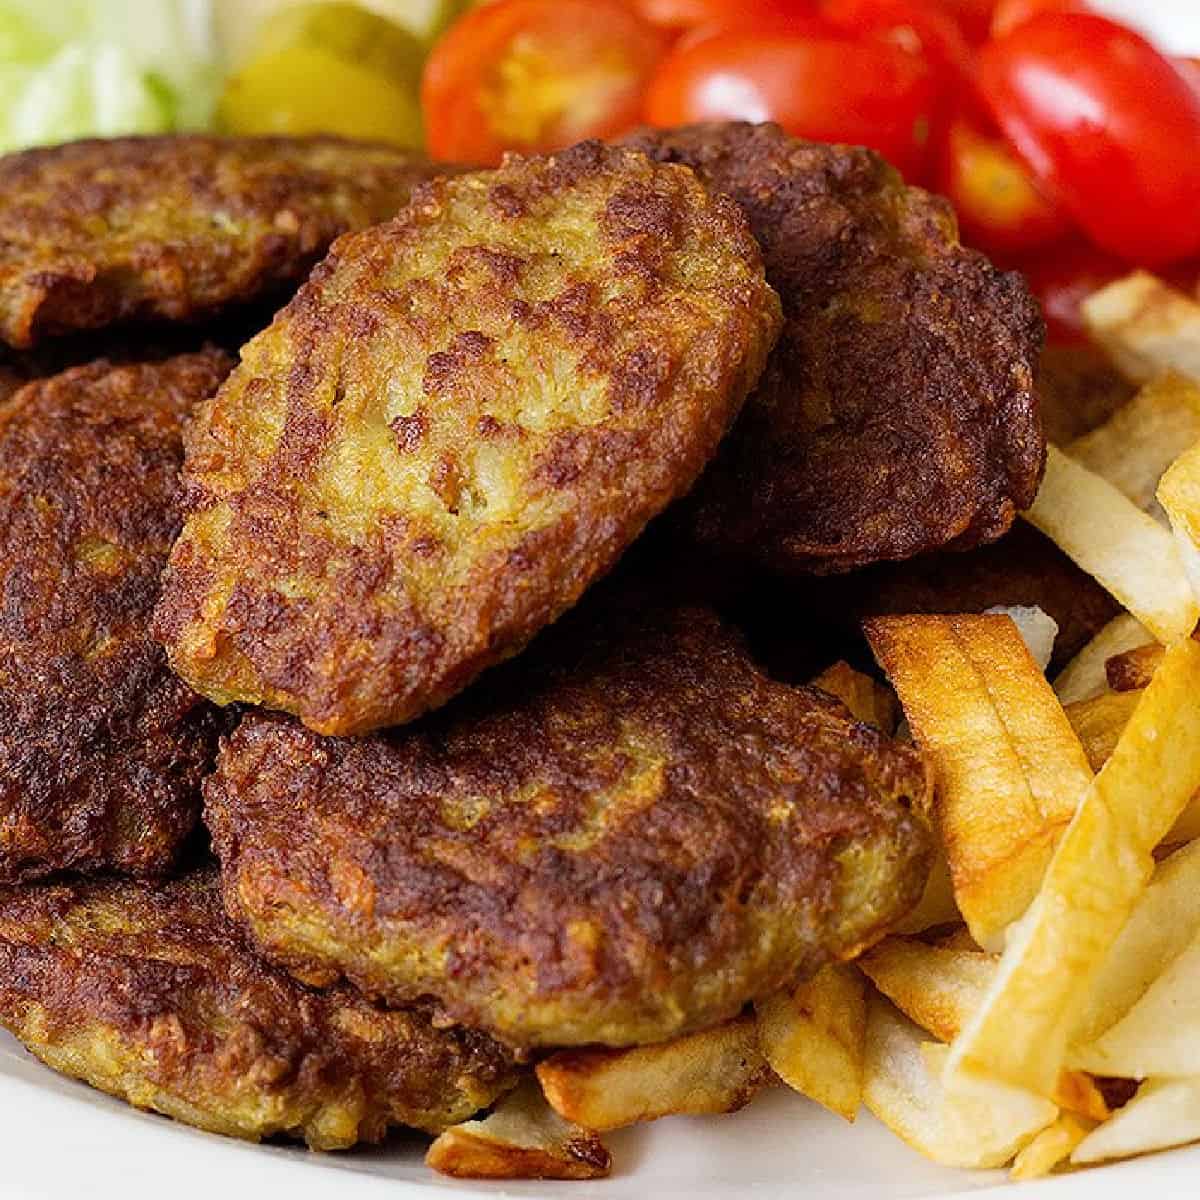 Persian meat patties aka Kotlet are tasty patties that are crispy on the outside and juicy on the inside. They are easy to make and so delicious to eat!
